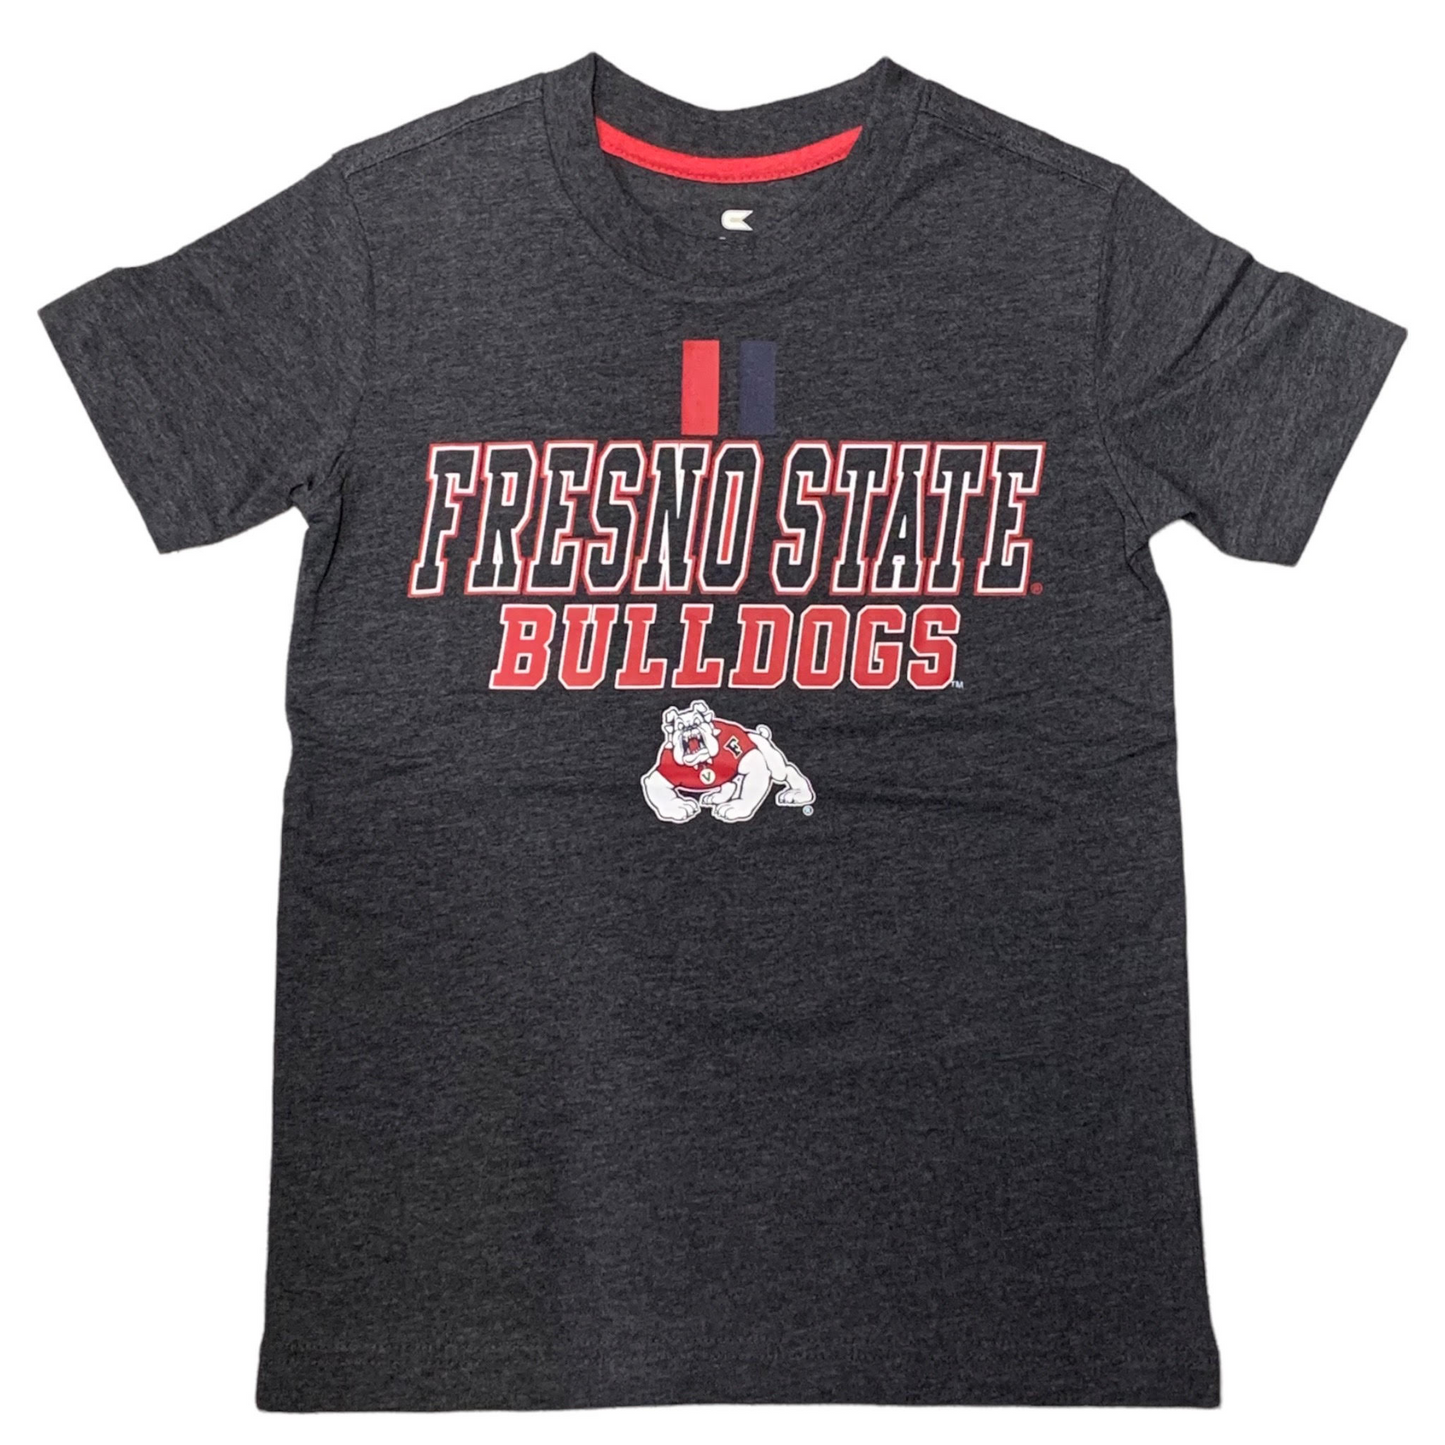 FRESNO STATE BULLDOGS YOUTH FLY A KITE T-SHIRT - GRAY